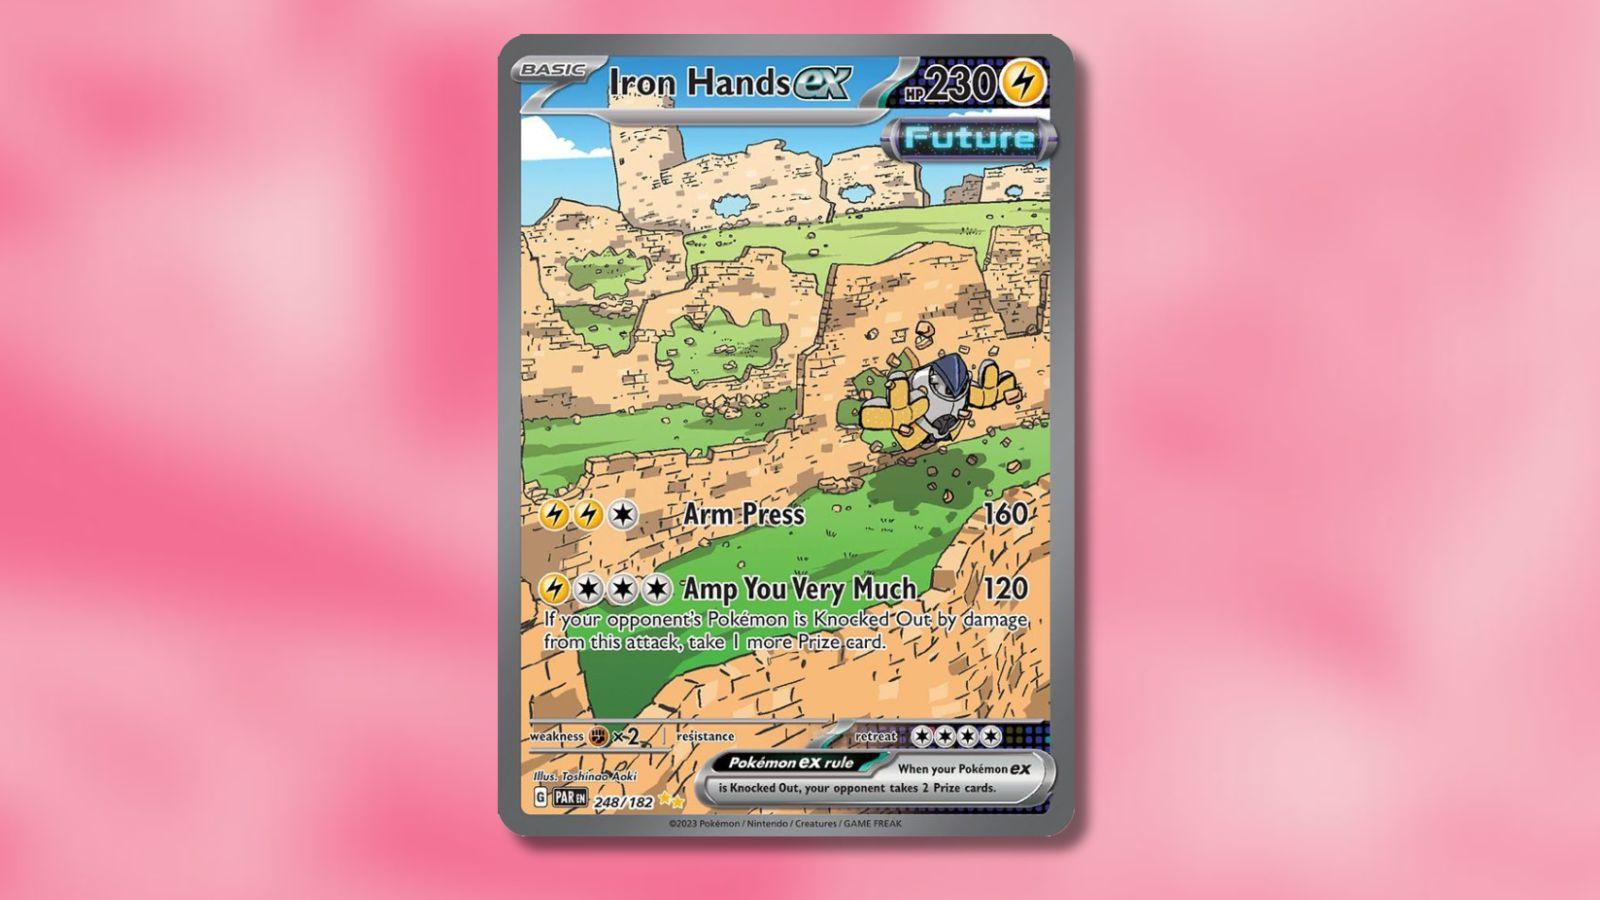 The Iron Hands Ex Pokemon card is placed against a pink background